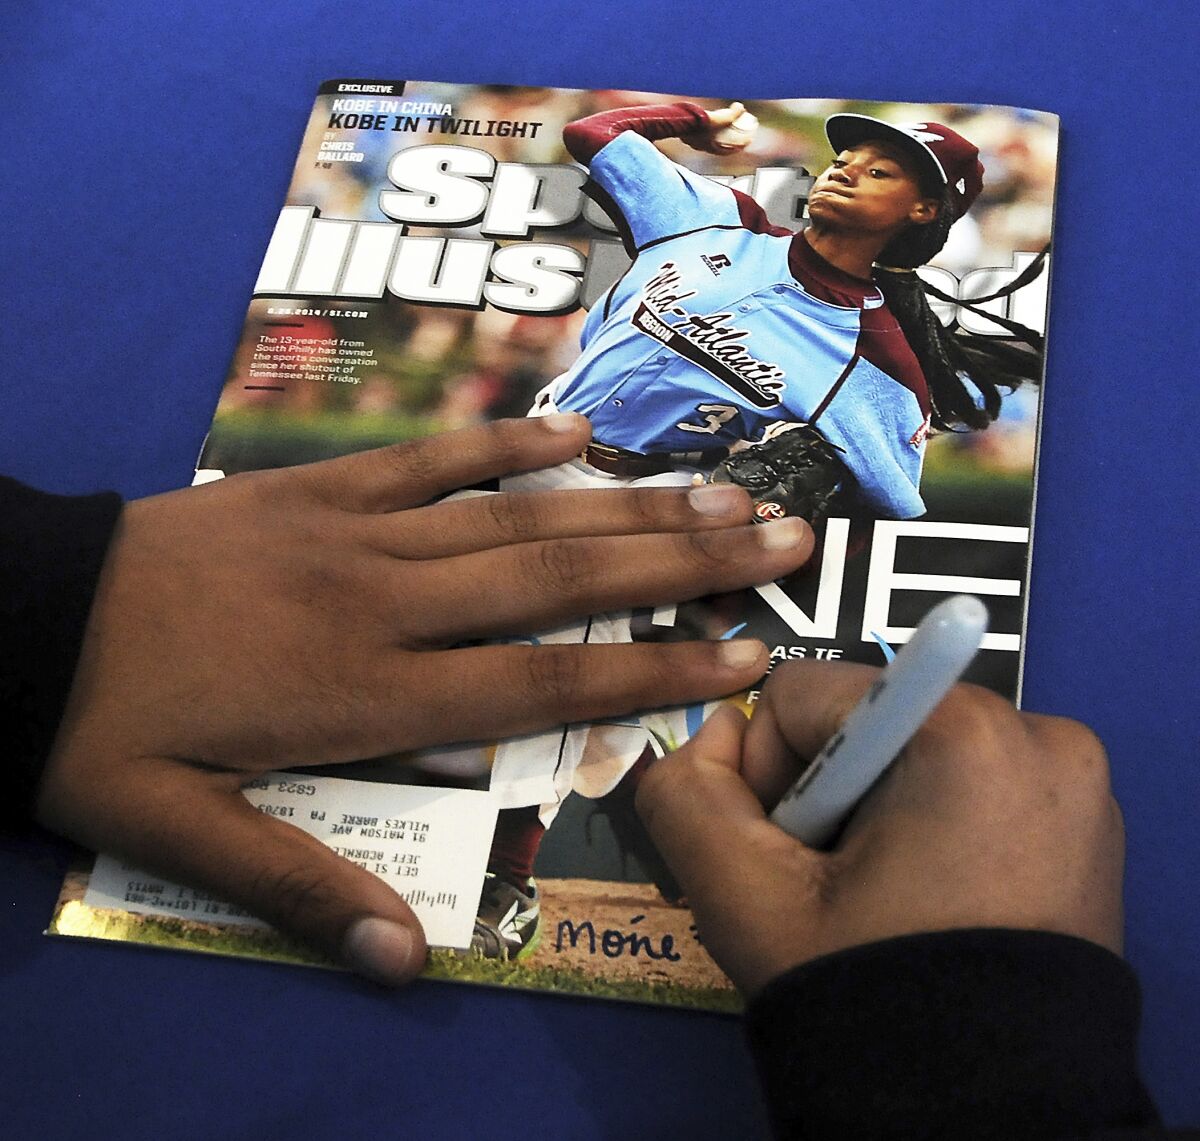 On Feb. 27, 2016 file photo, Mo'ne Davis signs an autograph for a fan on the cover of Sports Illustrated magazine.